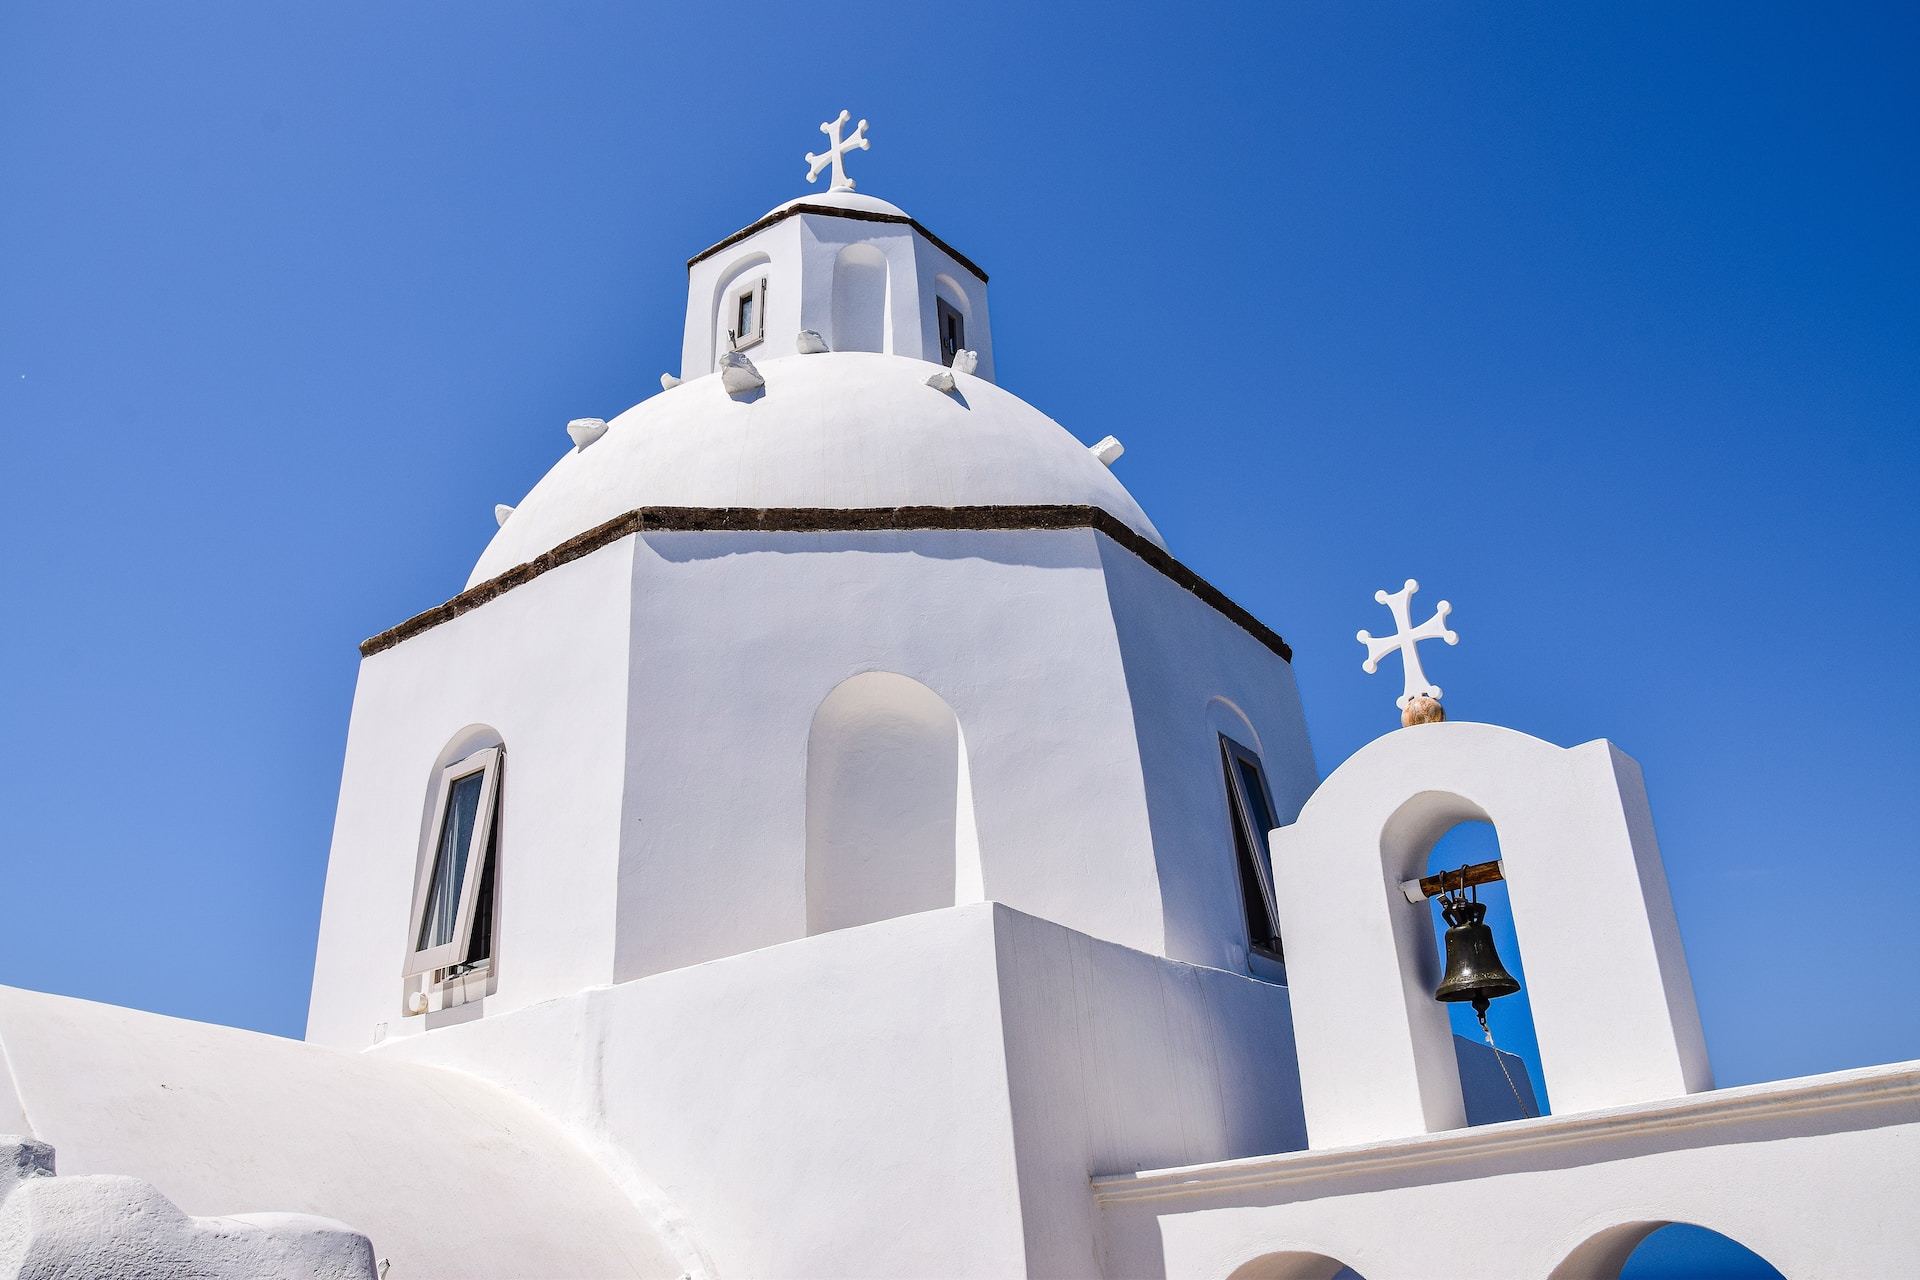 August 15th in Greece: A Mesmerizing Blend of Faith, Sun, and Tradition